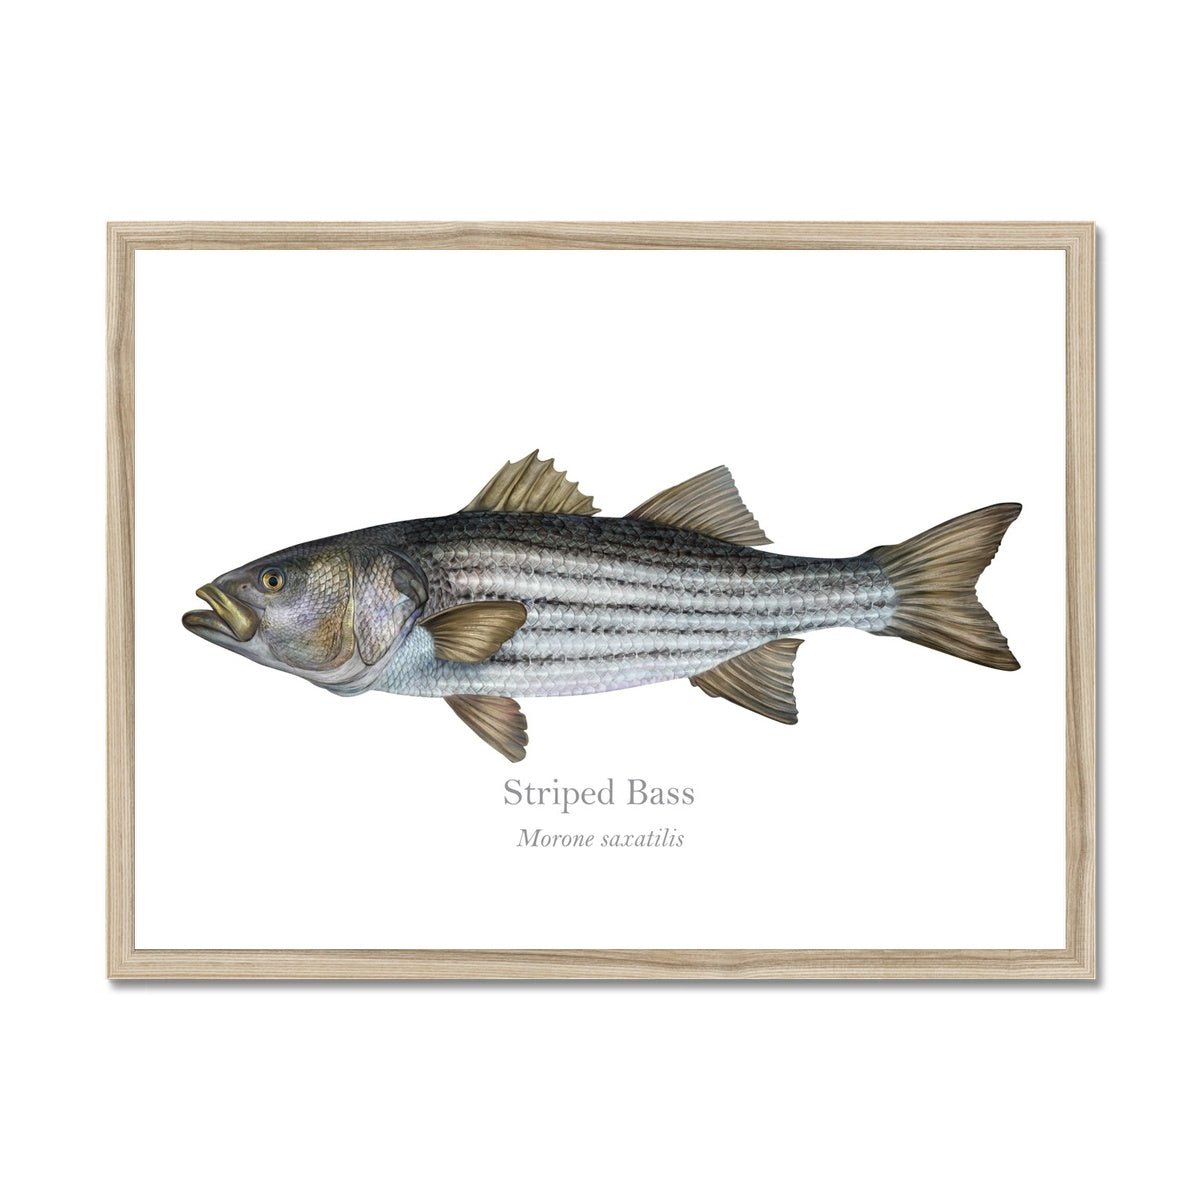 Striped Bass - Framed Print - With Scientific Name - madfishlab.com